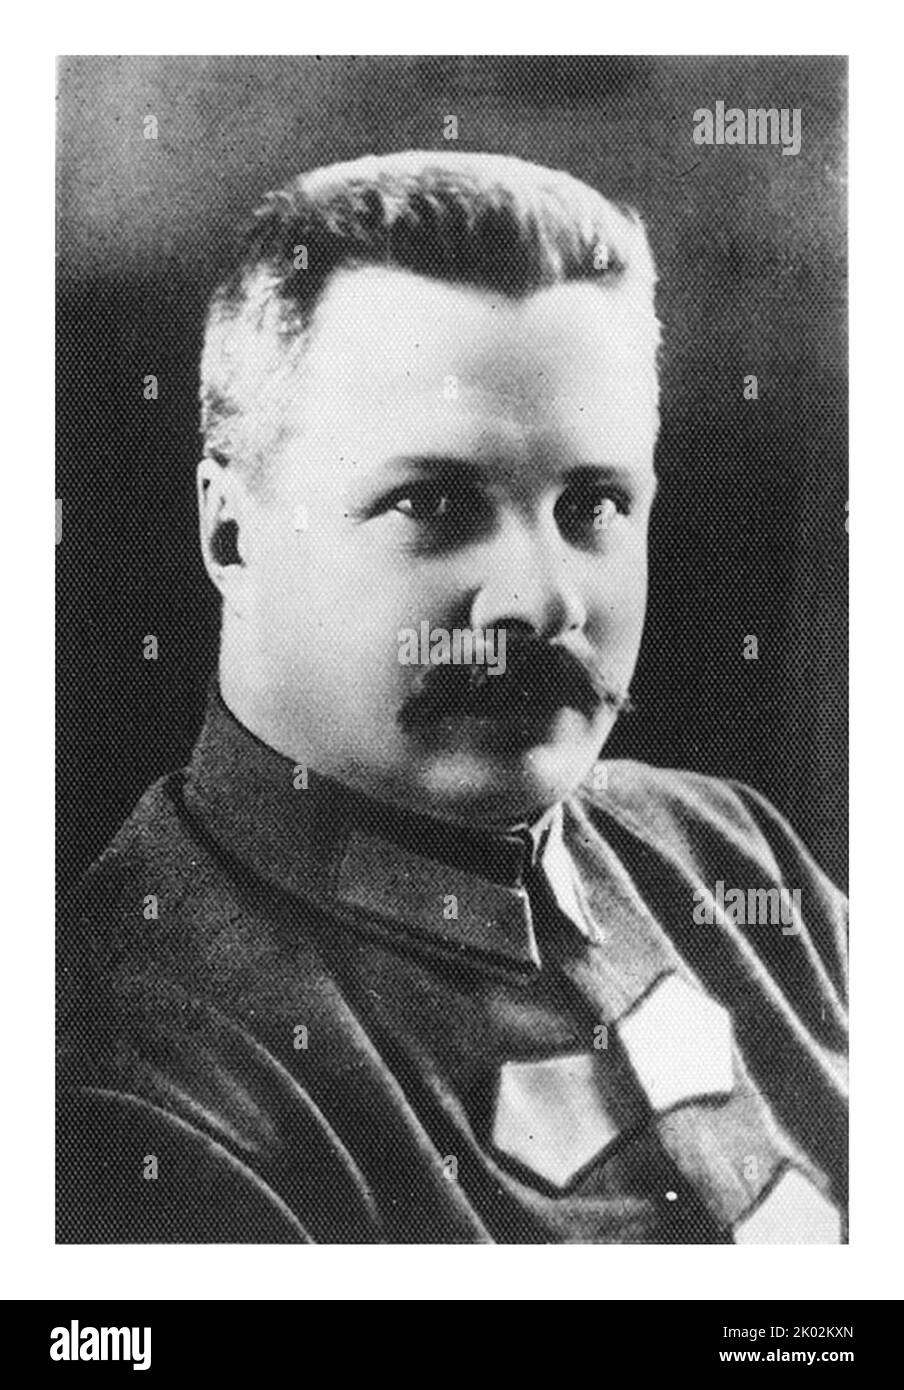 Mikhail Vasilyevich Frunze (1885 - 1925) Bolshevik leader during and just prior to the Russian Revolution of 1917. He is best known for defeating Baron Peter von Wrangel in Crimea. Stock Photo